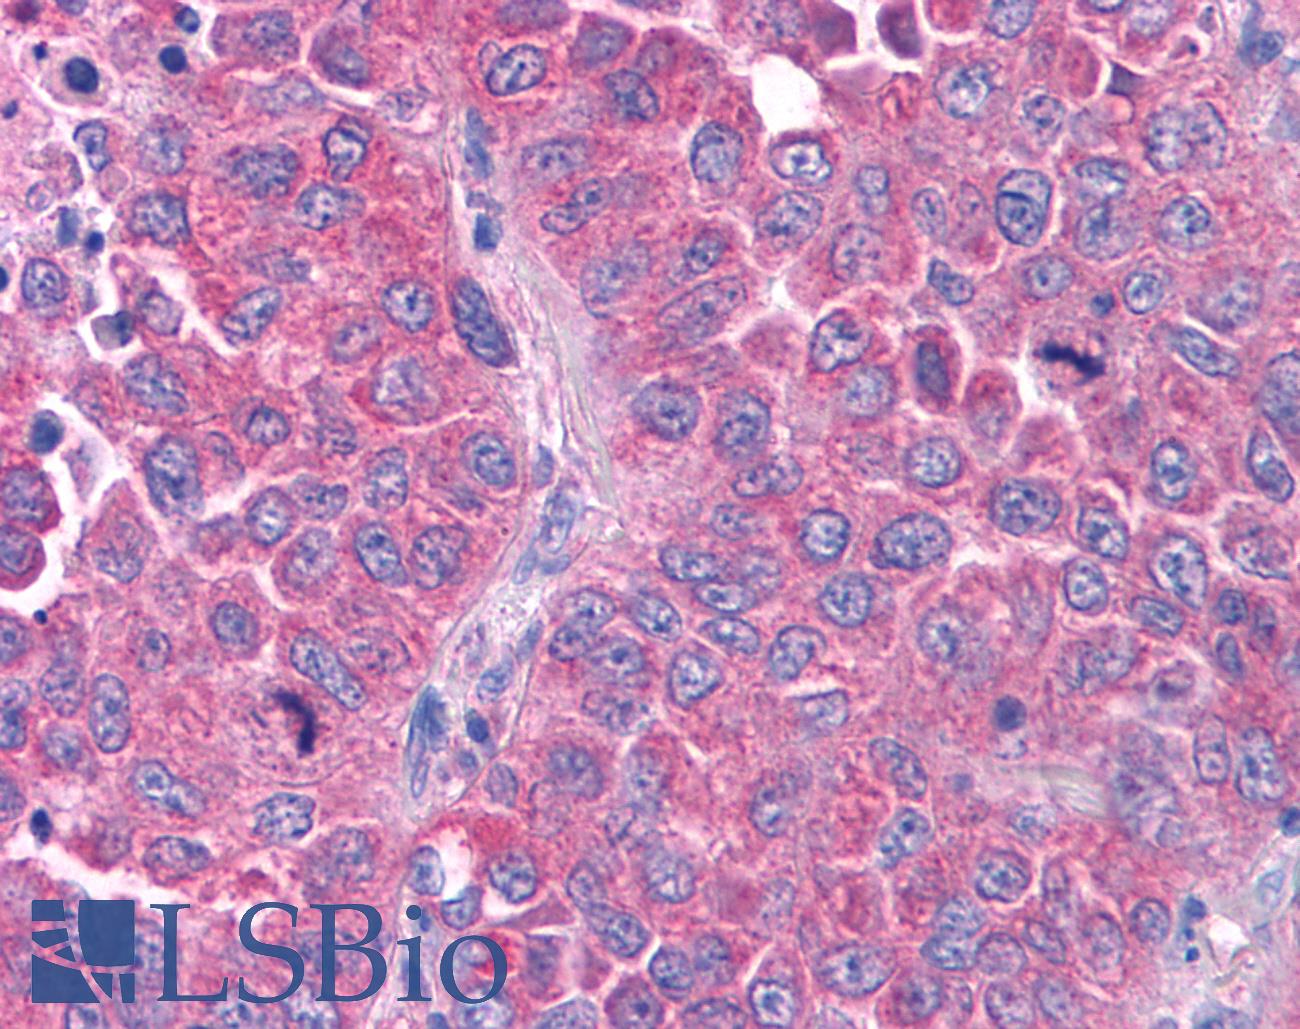 GPR80 / GPR99 / OXGR1 Antibody - Anti-GPR80 / GPR99 / OXGR1 antibody IHC of human Lung, Non-Small Cell Carcinoma. Immunohistochemistry of formalin-fixed, paraffin-embedded tissue after heat-induced antigen retrieval.